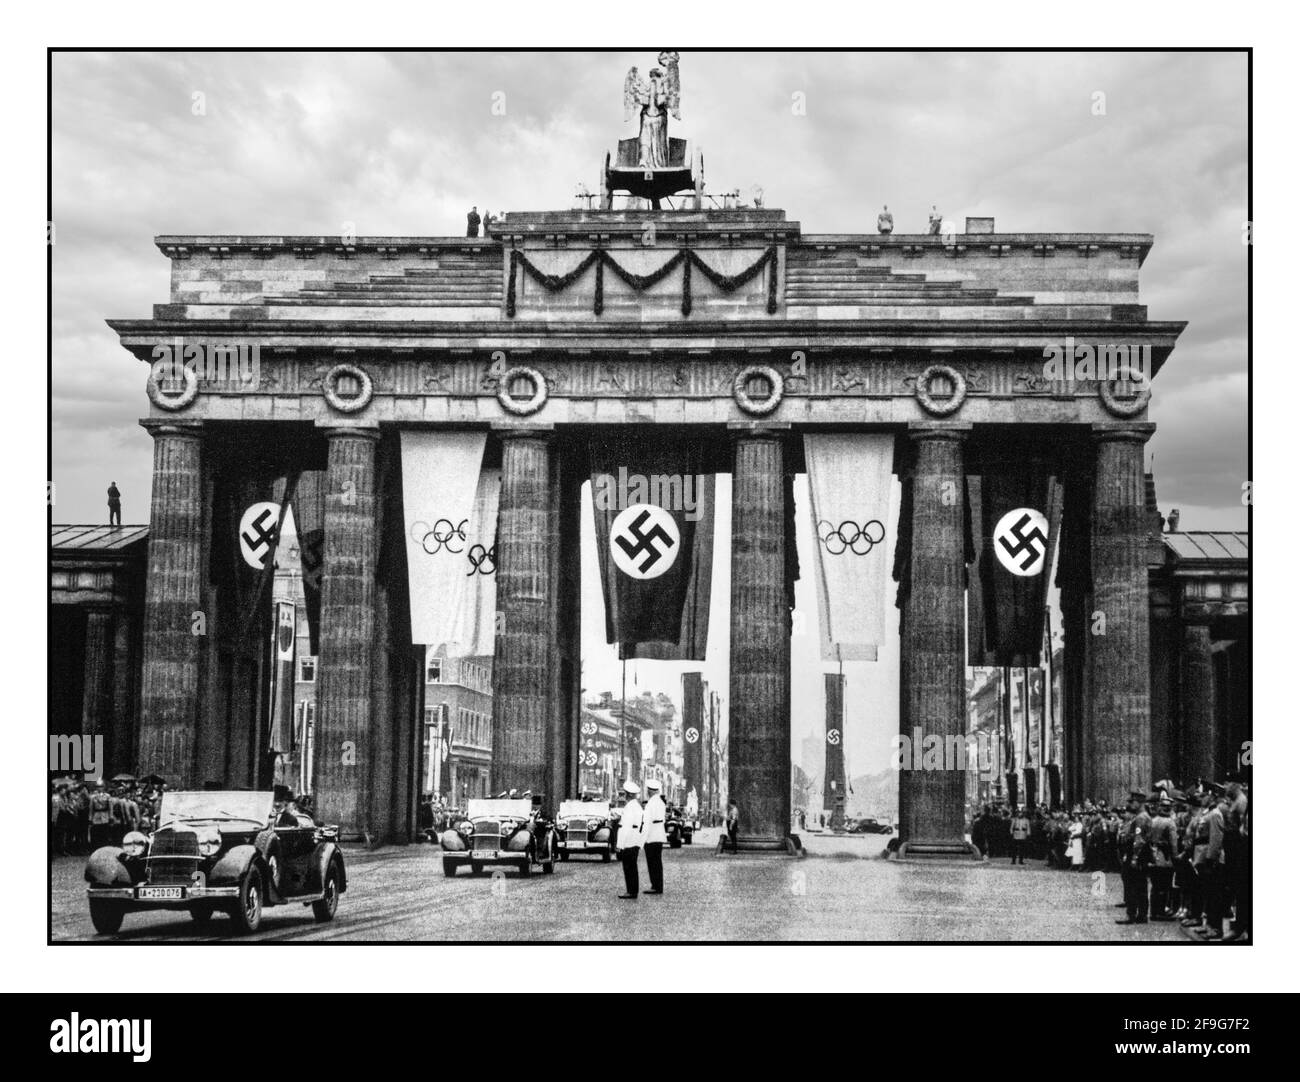 BERLIN OLYMPICS Vintage 1936 Brandenburg Gate Parade Berlin Nazi Germany with Nazi Swastika banners alongside official Olympic Games Flags Berlin Brandenburg Gate Nazi Germany   Parade with Adolf Hitler leading passes through the Brandenburg Gate on the way to the opening ceremonies of the Olympic Games. Berlin, Germany, August 1, 1936. Stock Photo